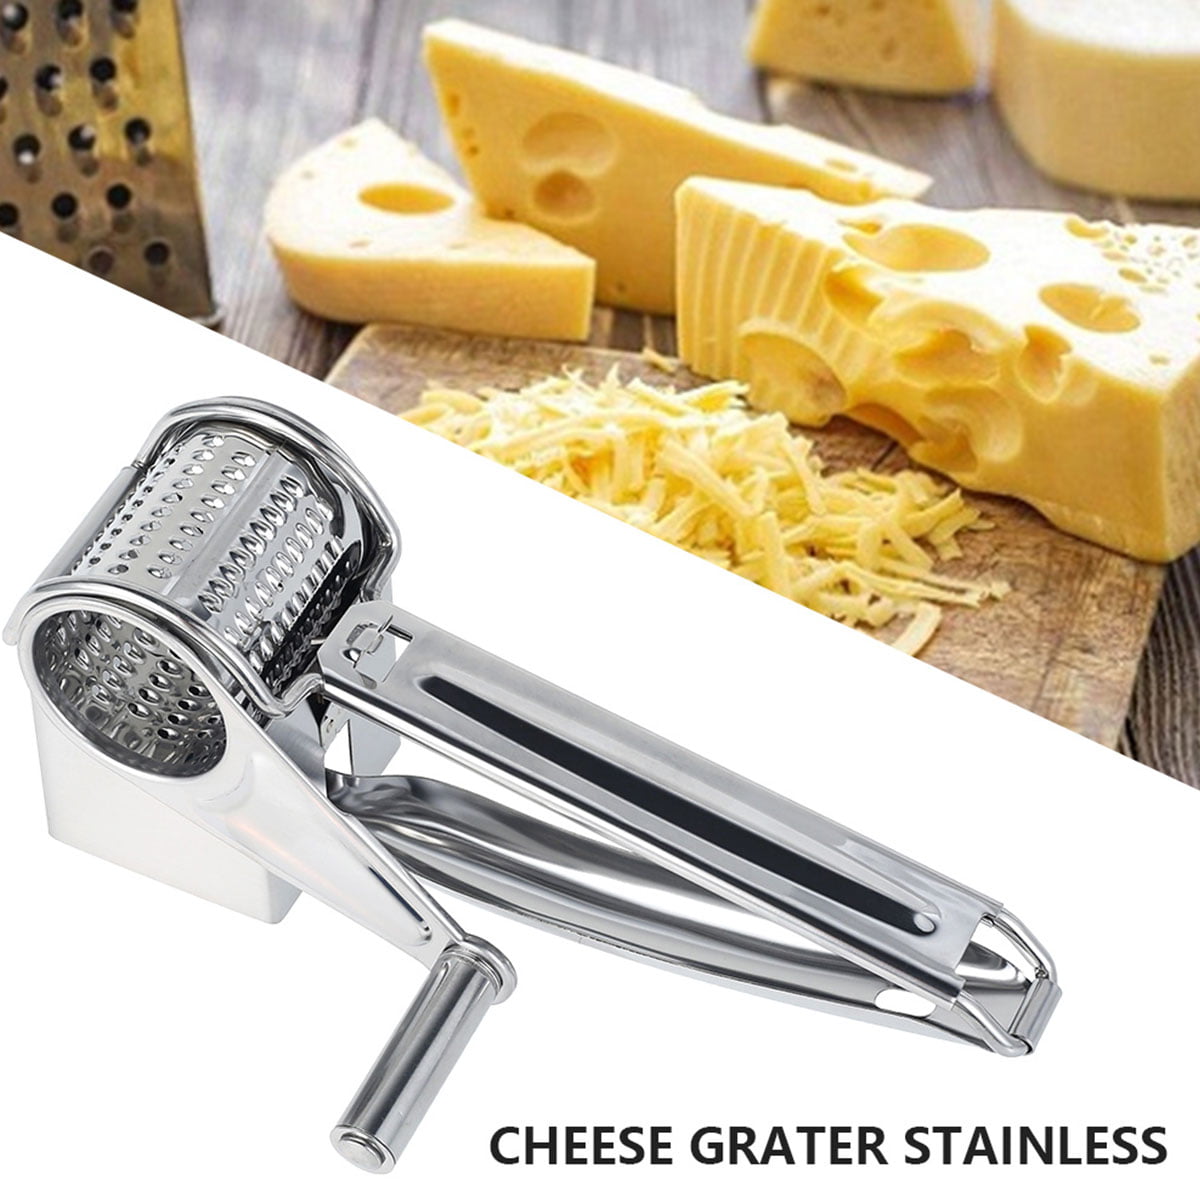  Ancevsk Rotary Cheese Grater with Handle, Manual Speed Round  Cheese Shredder with Strong Suction Base, Easy to Use Potato Hashbrown  Shredder with 3 Replaceable Stainless Steel Drum Blades (Black): Home 